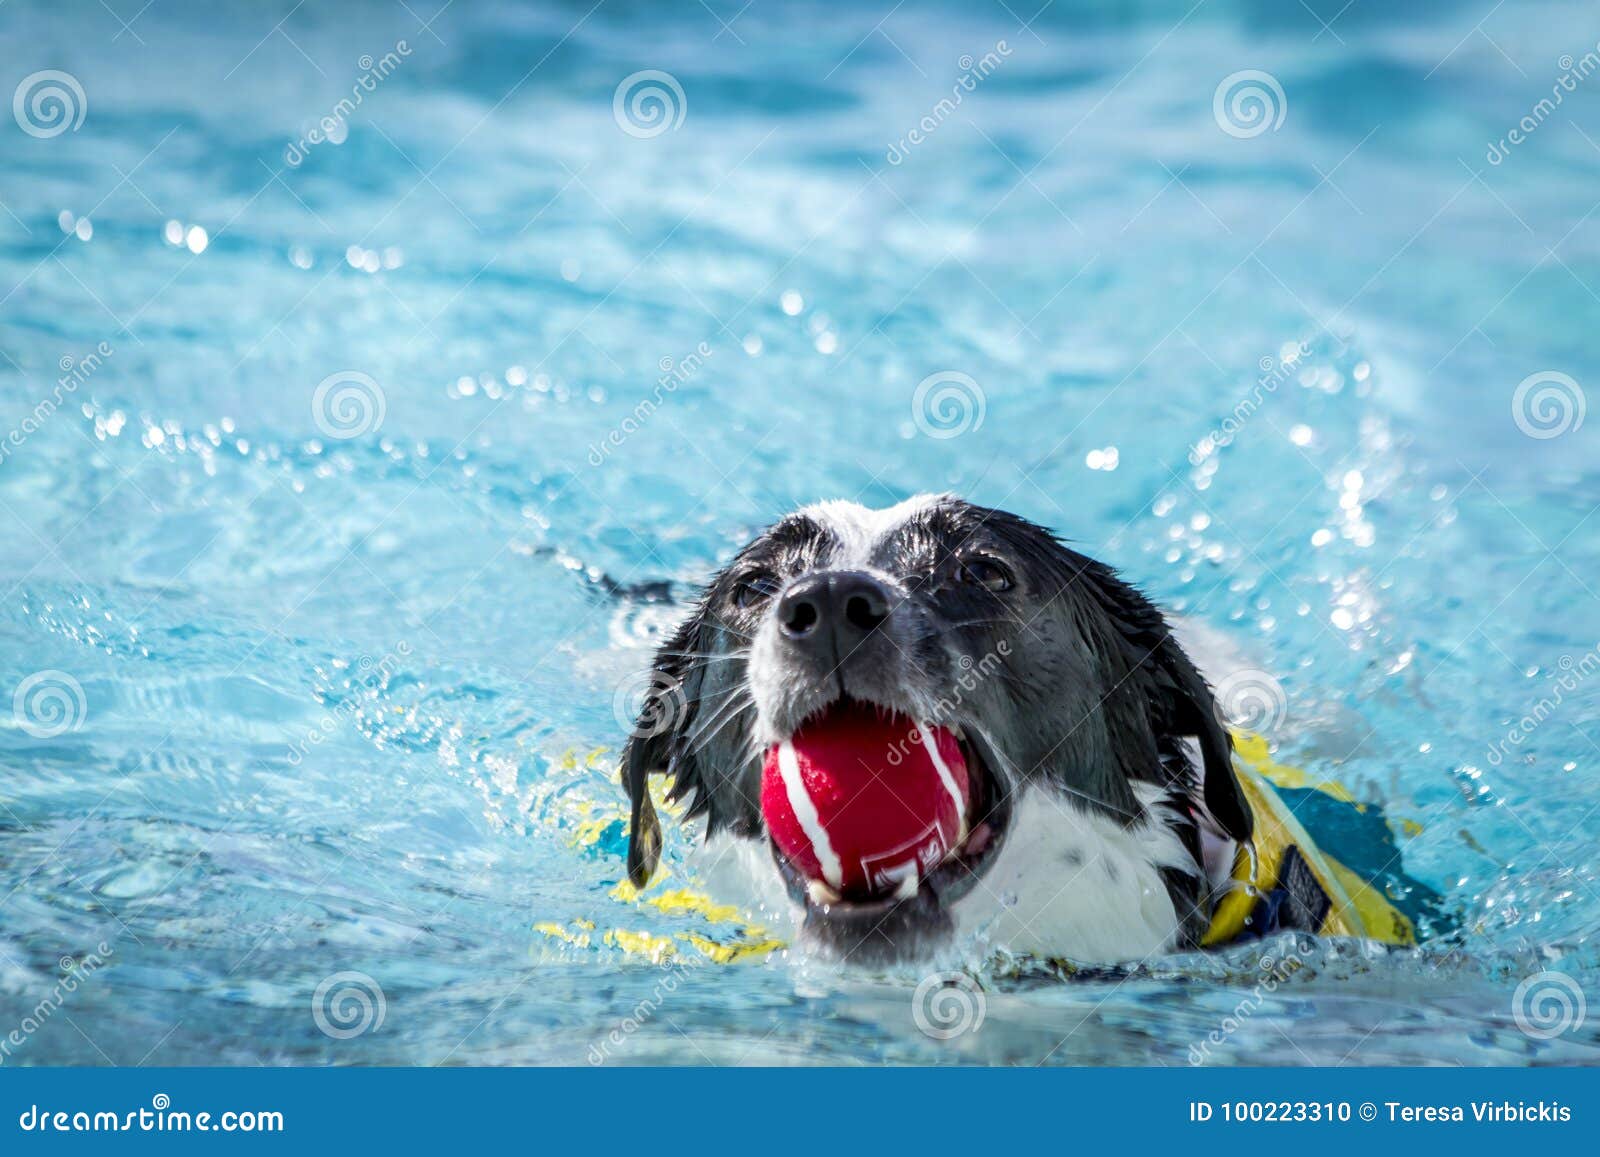 Dogs Playing in Swimming Pool Stock Photo - Image of dripping, soaked